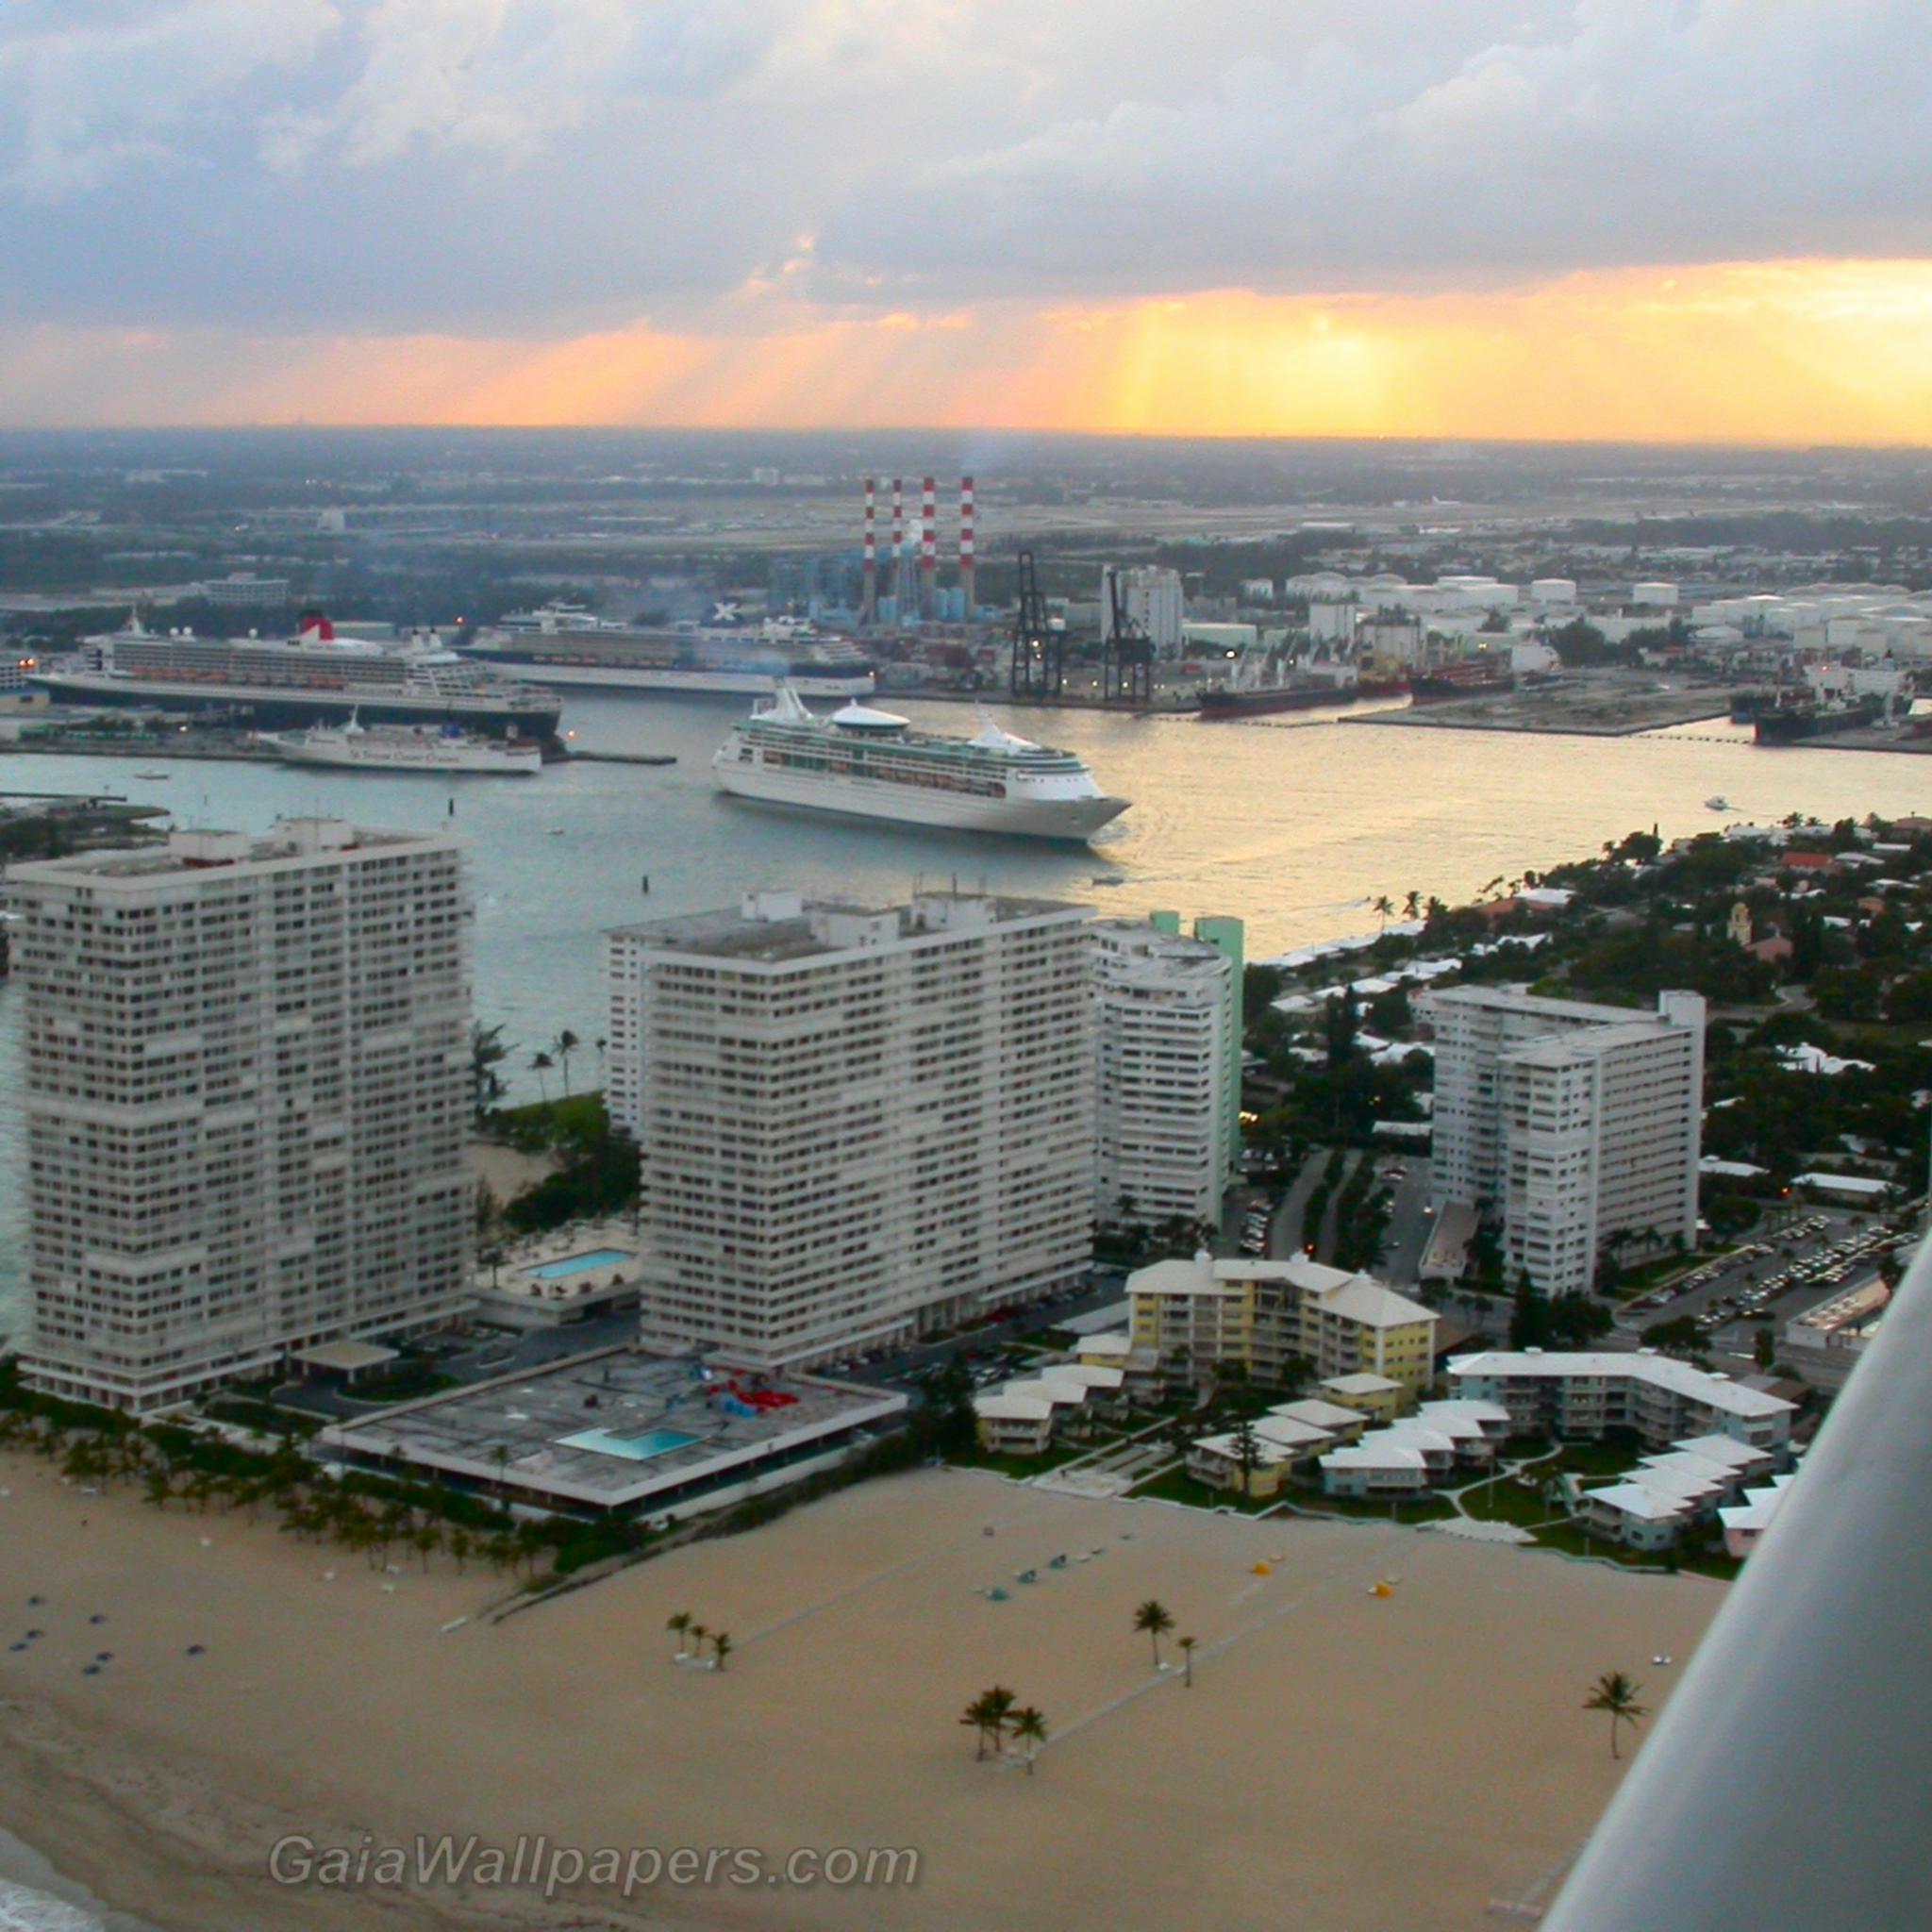 Florida shore seen from the air - Free desktop wallpapers